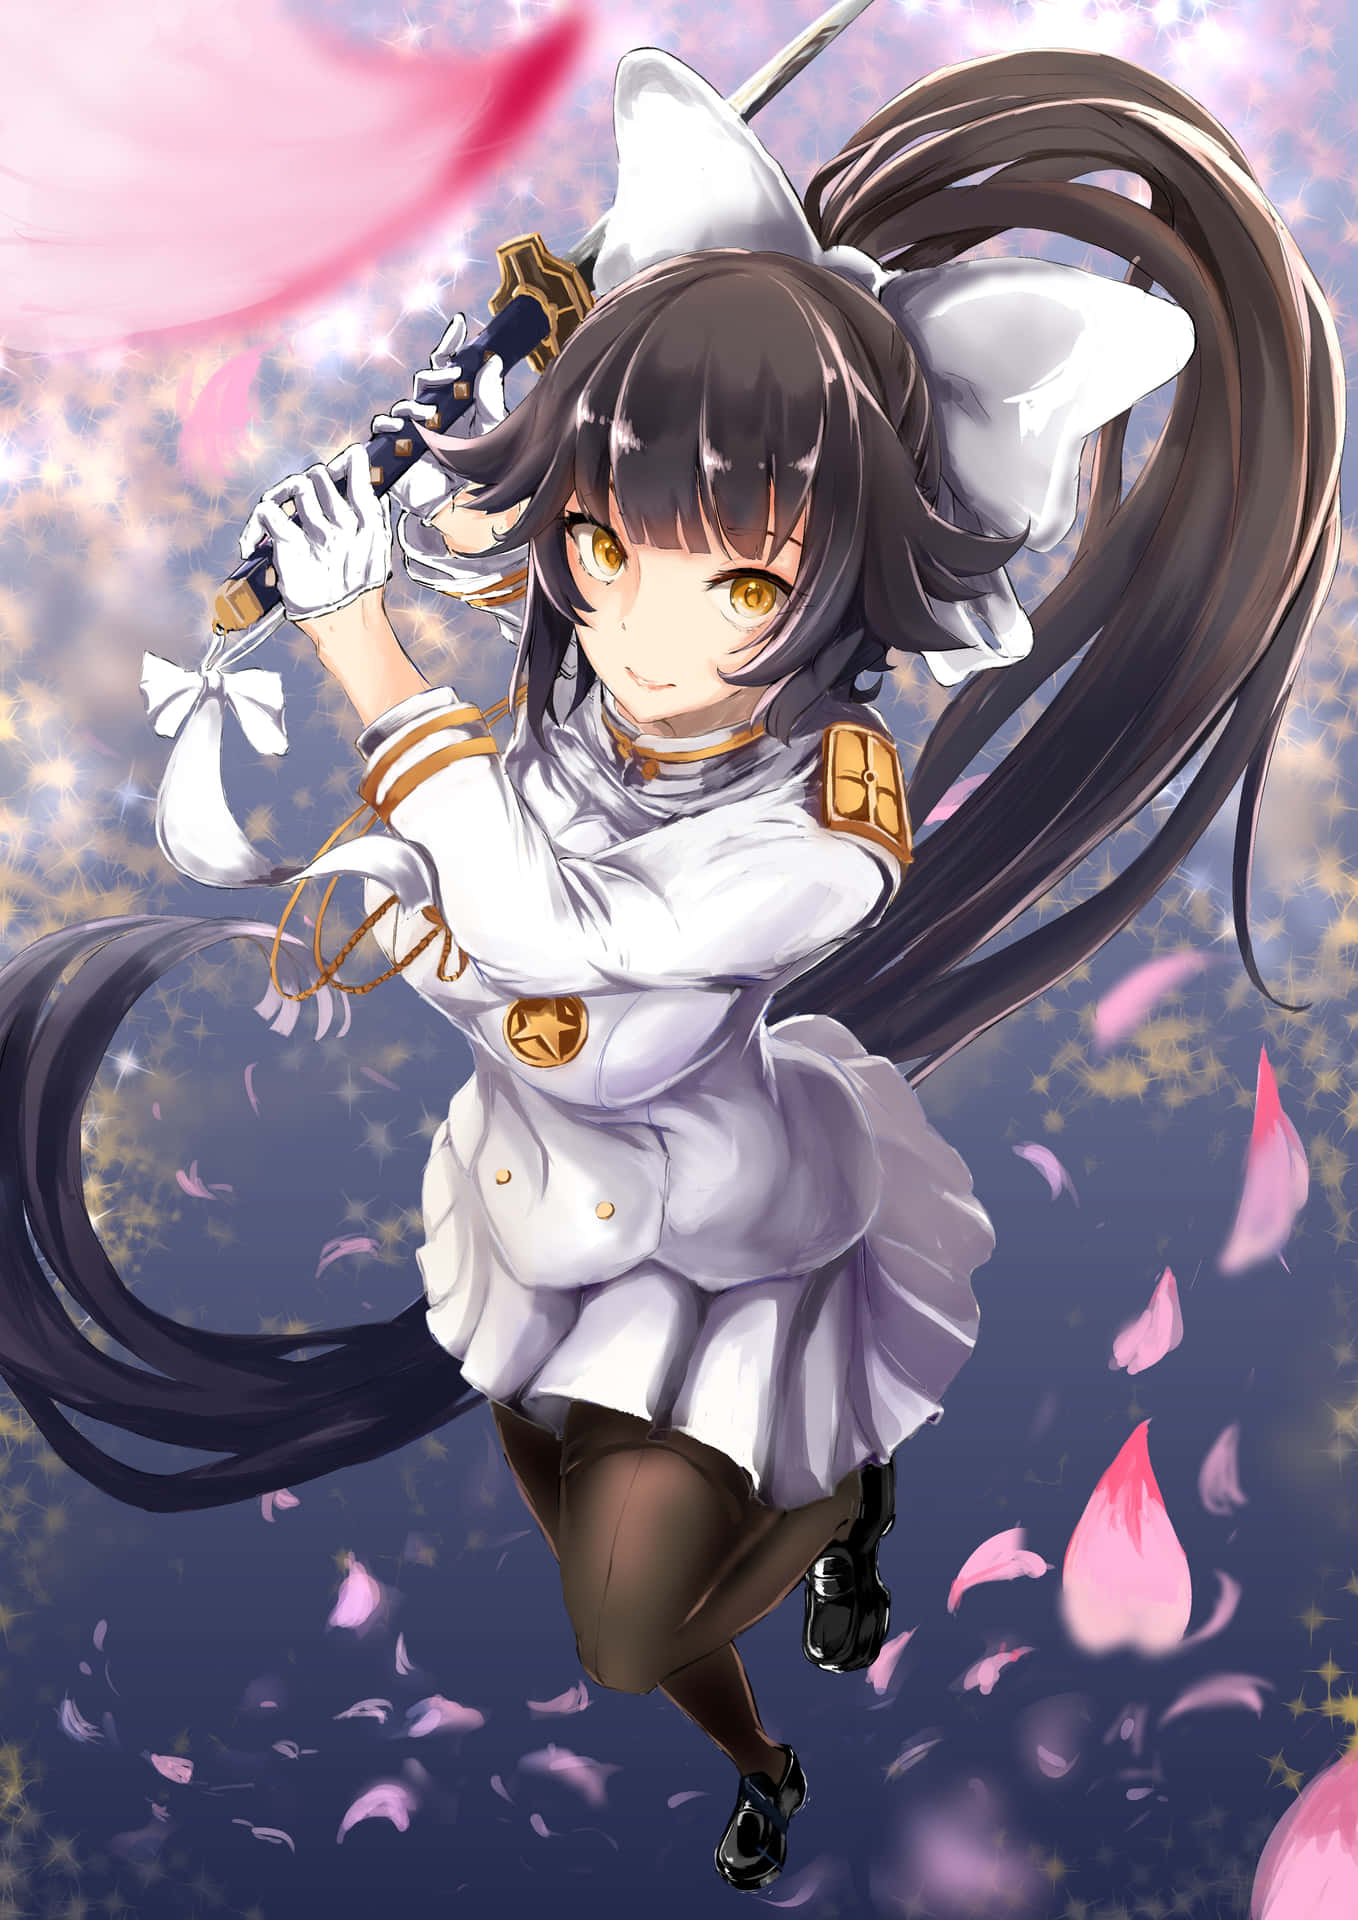 Azur Lane Takao - A Beautiful, Strong, And Determined Warrior At Sea. Wallpaper